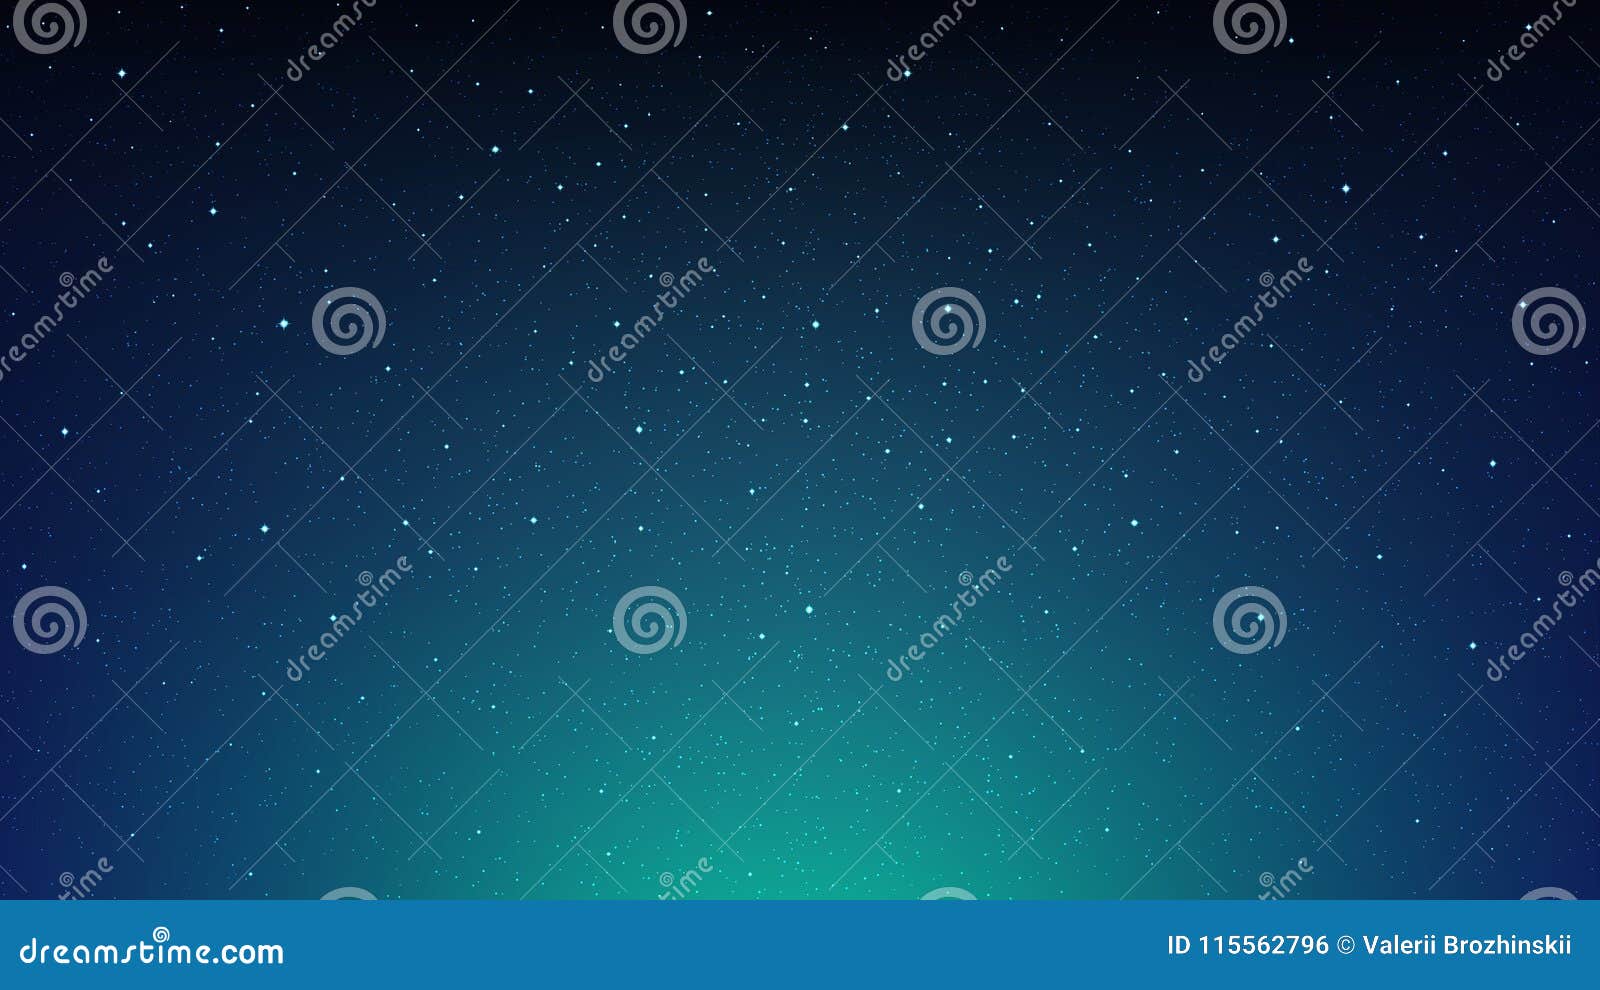 night shining starry sky, blue space background with stars, cosmos